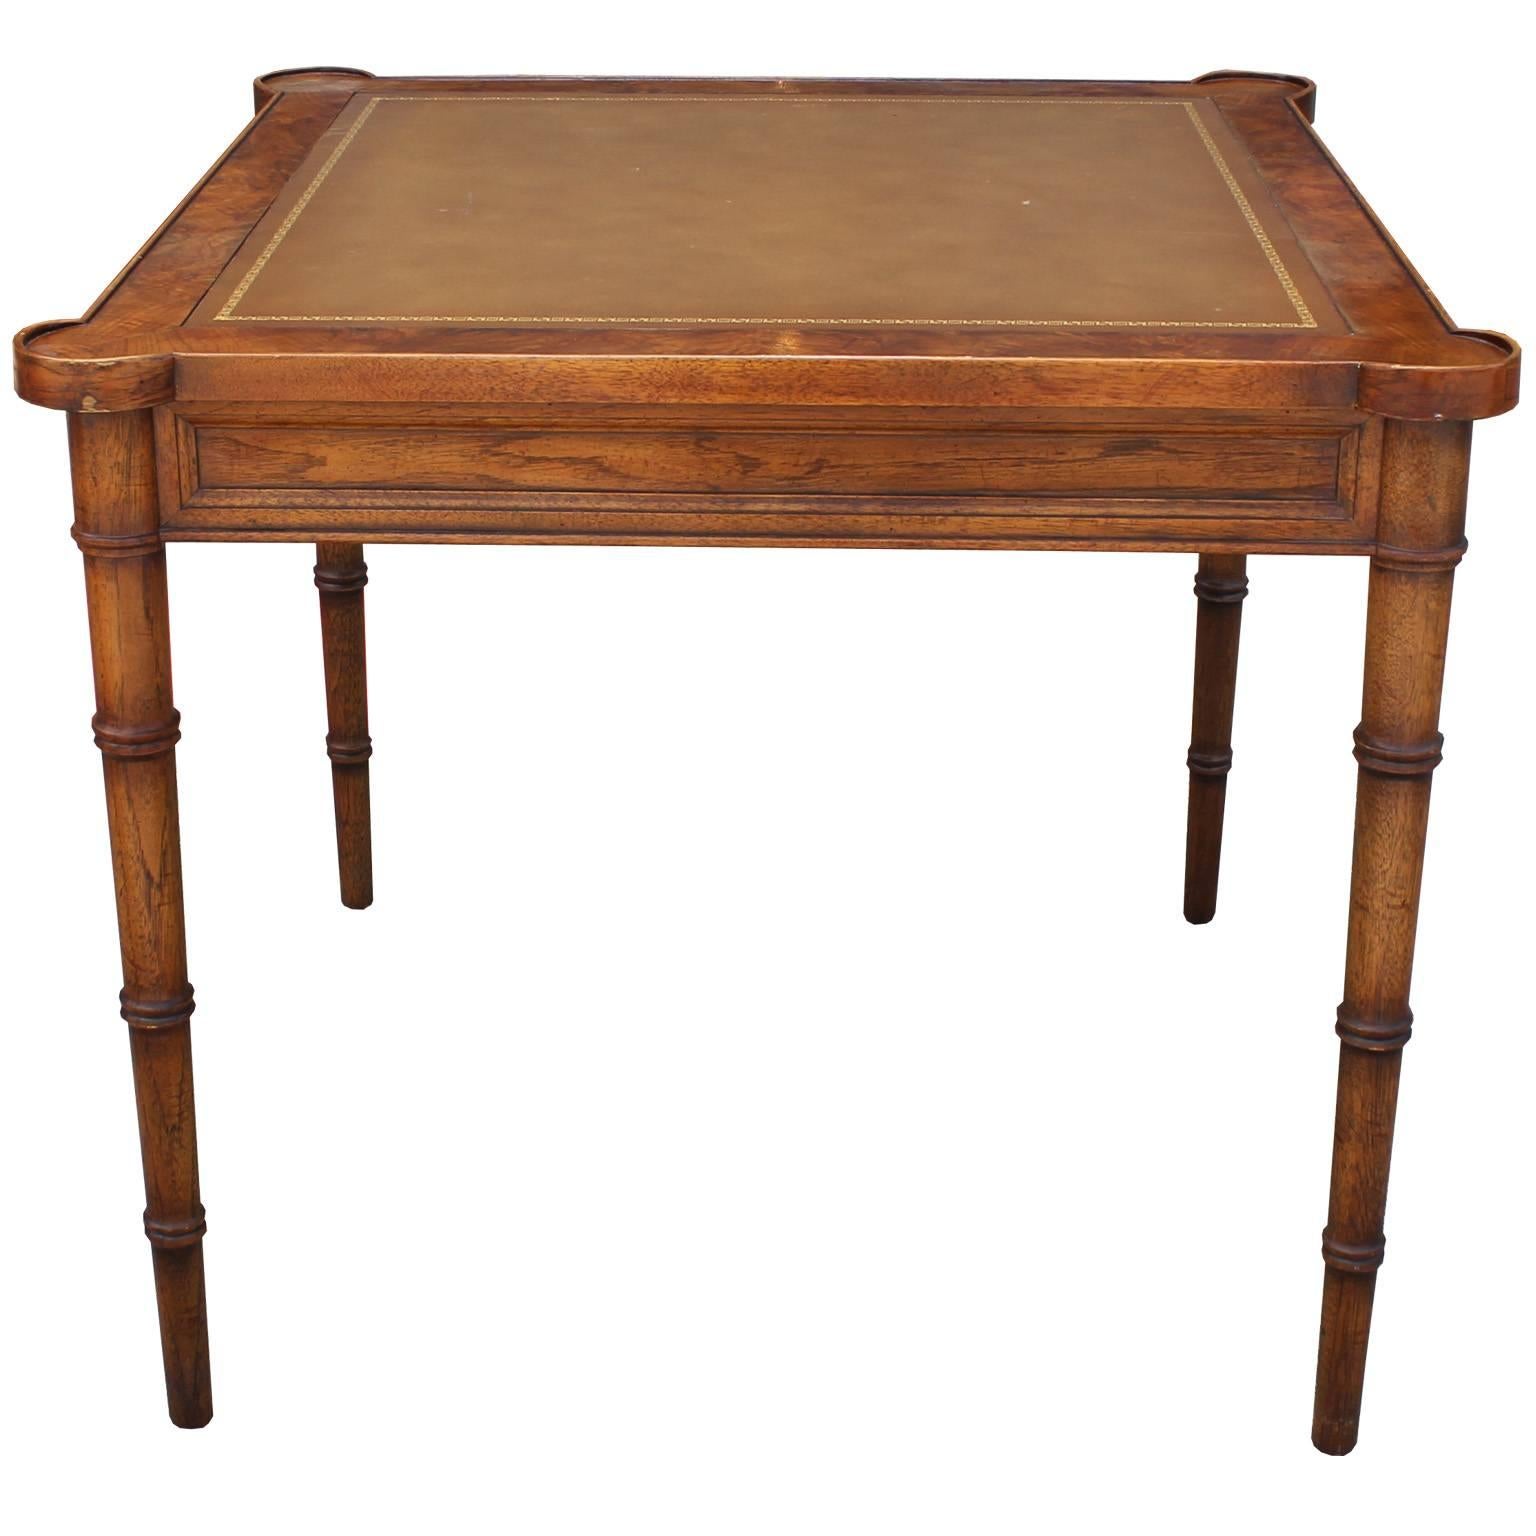 Elegant burl walnut, leather, and faux bamboo square card or game table by Drexel. Table has excellent lines and detailing. Leather top is accented with a gold motif. Table would be excellent in a Hollywood regency, transitional, or Mid-Century